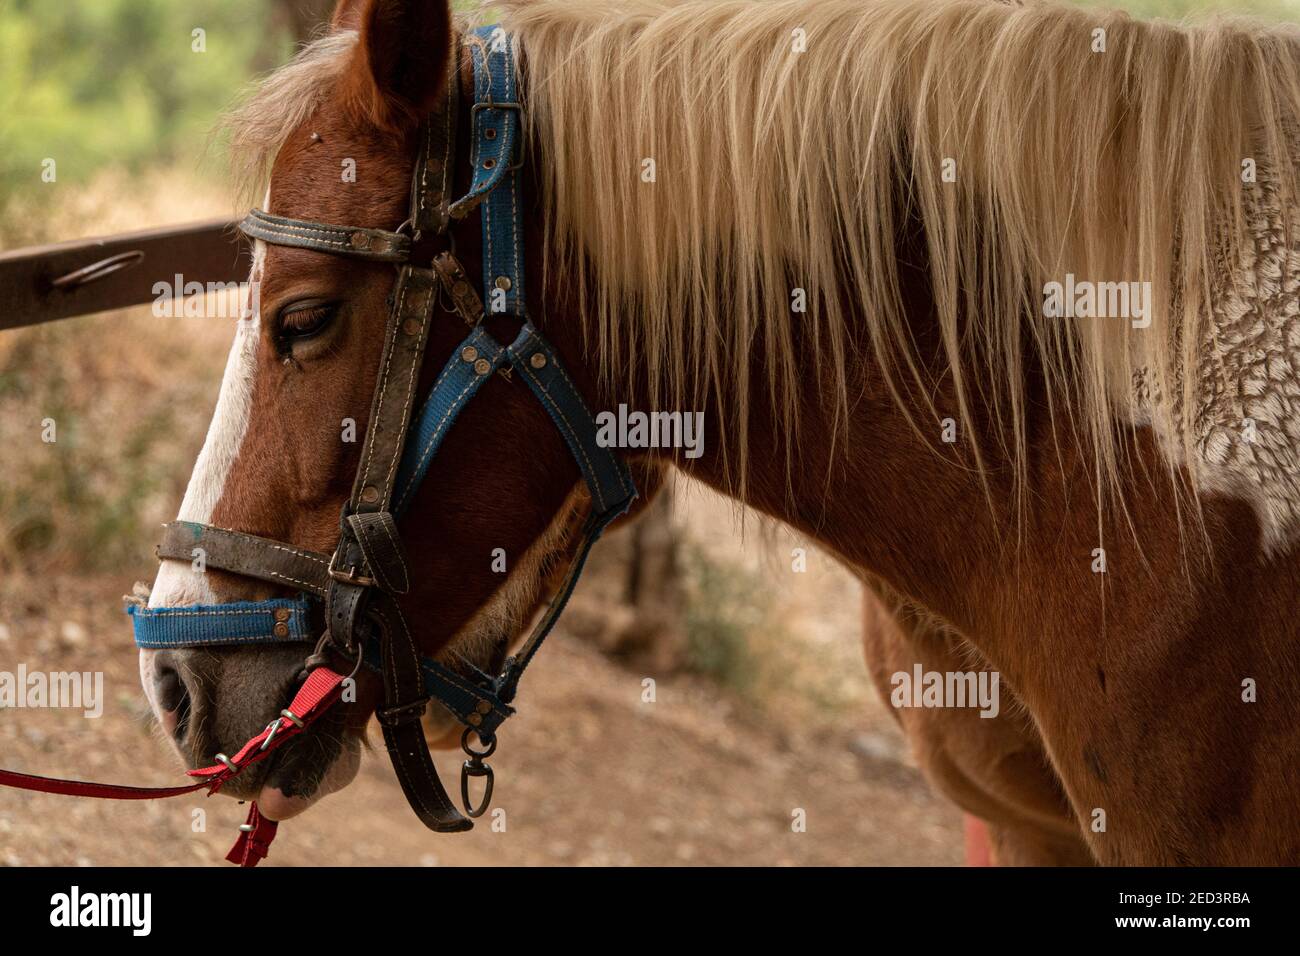 Tied brown haflinger horse with harness saddle. Stock Photo